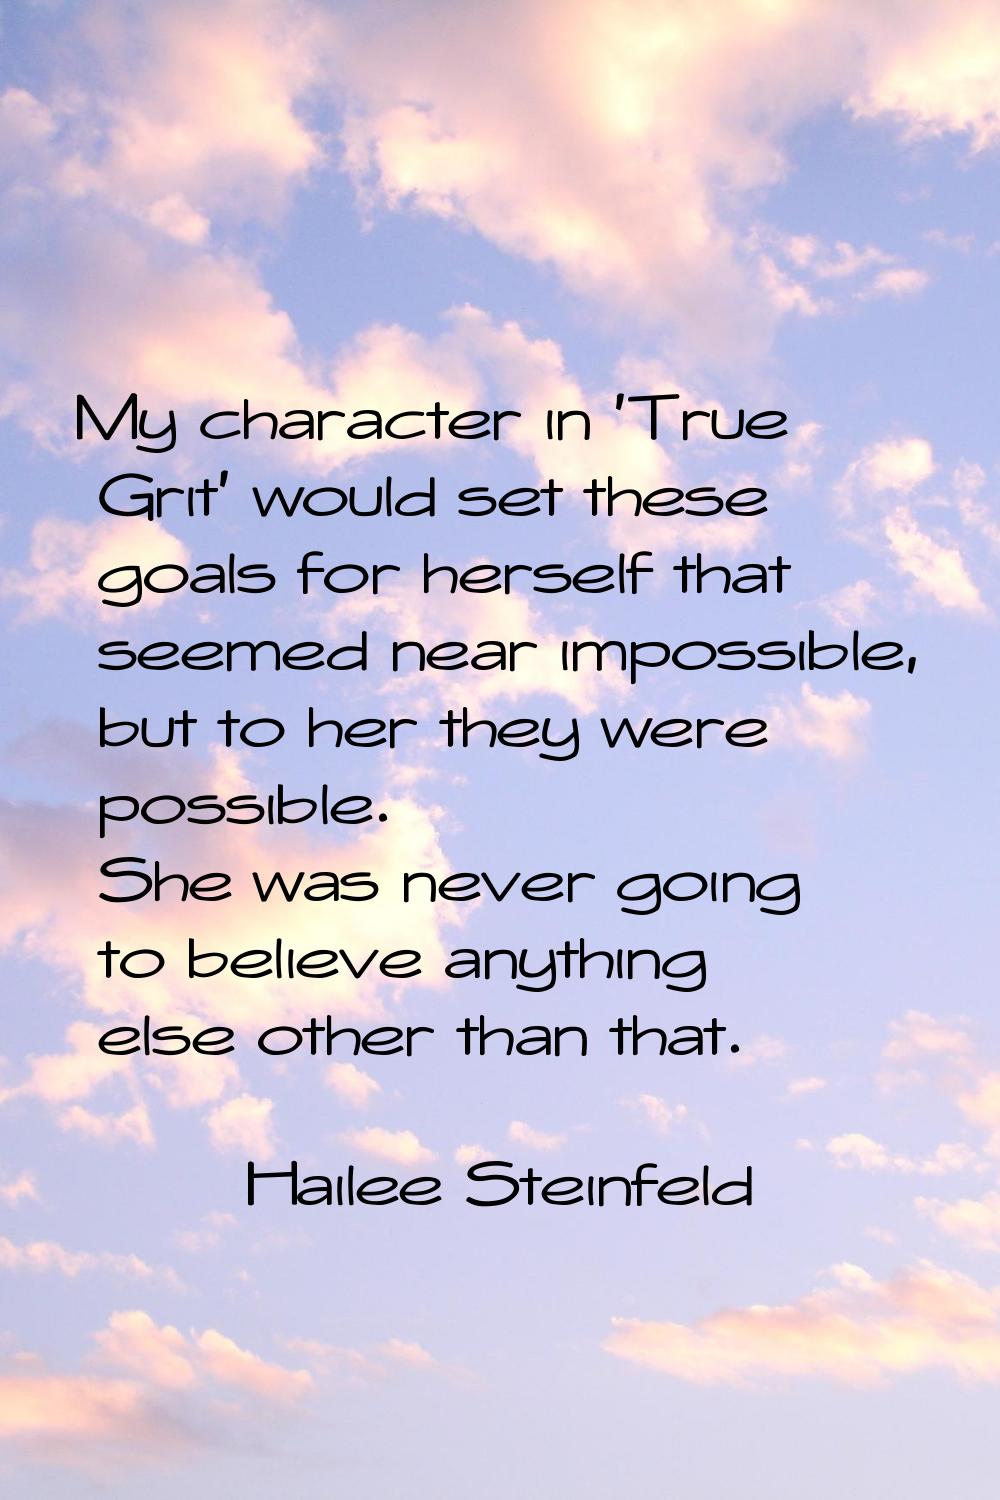 My character in 'True Grit' would set these goals for herself that seemed near impossible, but to h